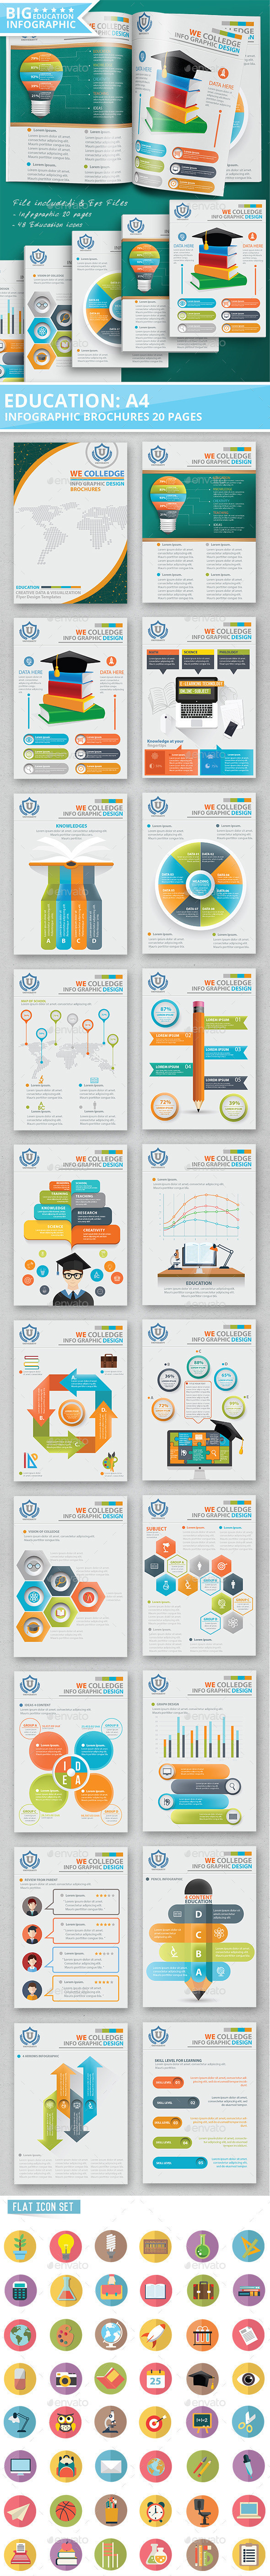 Preview 20education 20infographic 20design1